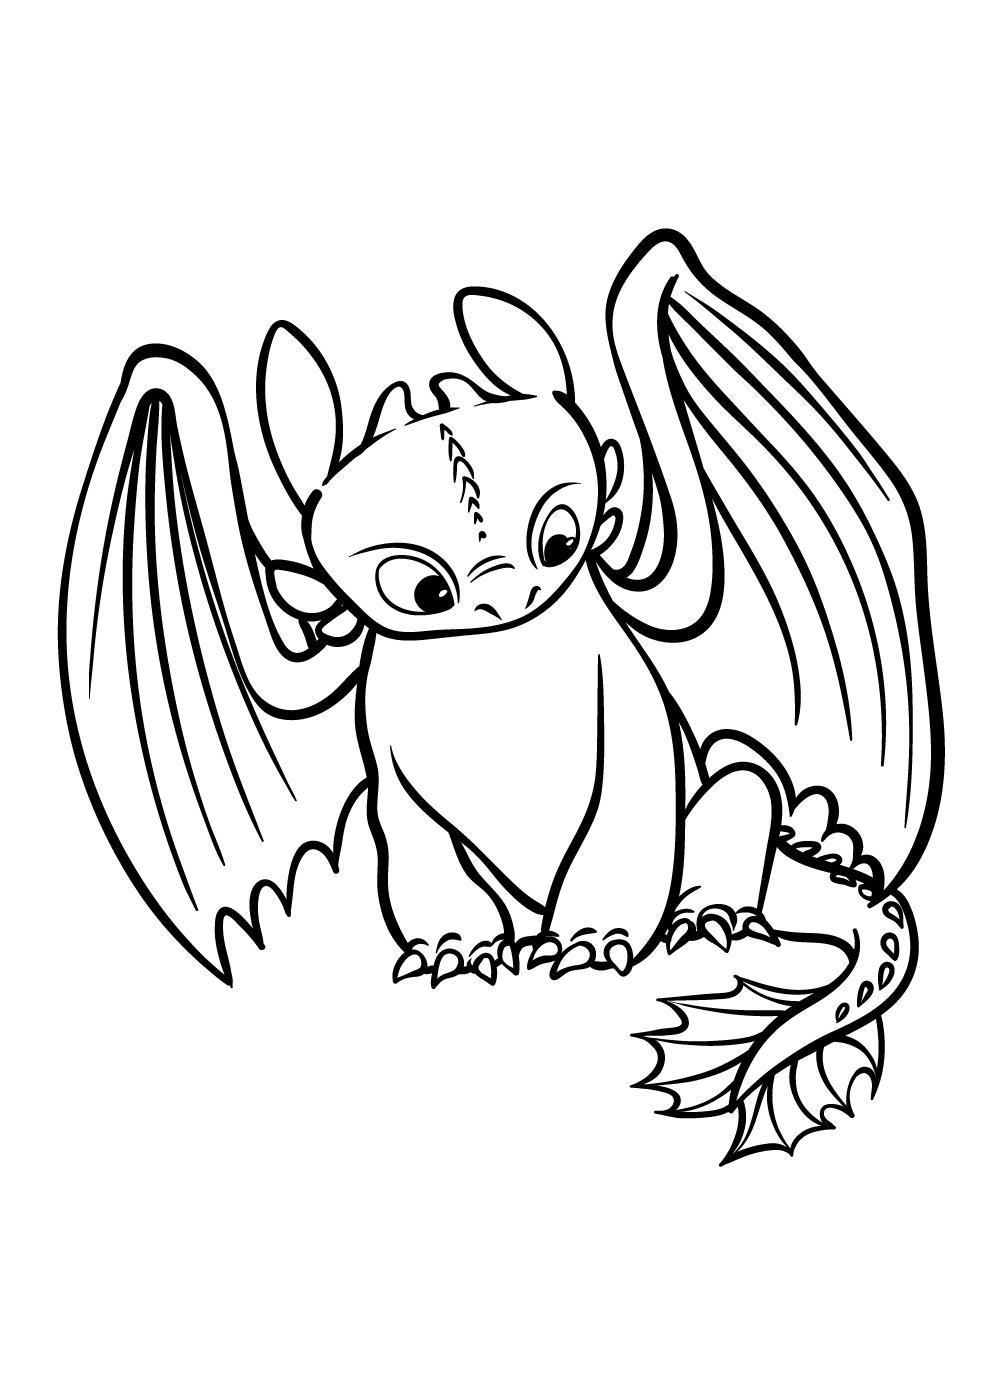 Toothless Coloring Pages